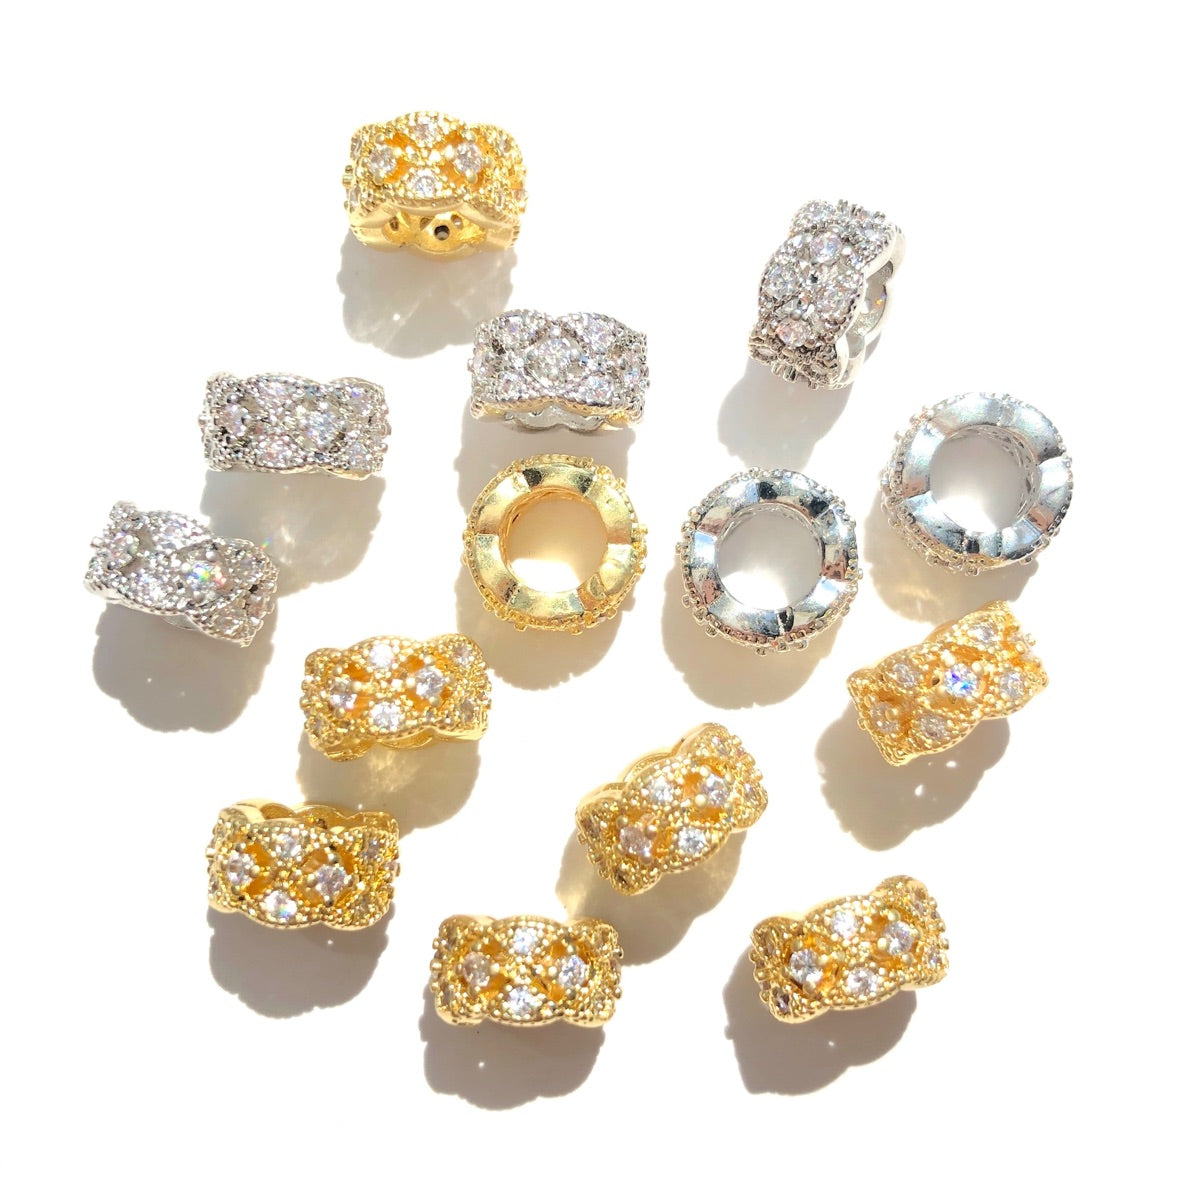 20-50pcs/lot 8mm CZ Paved Hollow Rondelle Wheel Spacers Mix Colors CZ Paved Spacers New Spacers Arrivals Rondelle Beads Wholesale Charms Beads Beyond